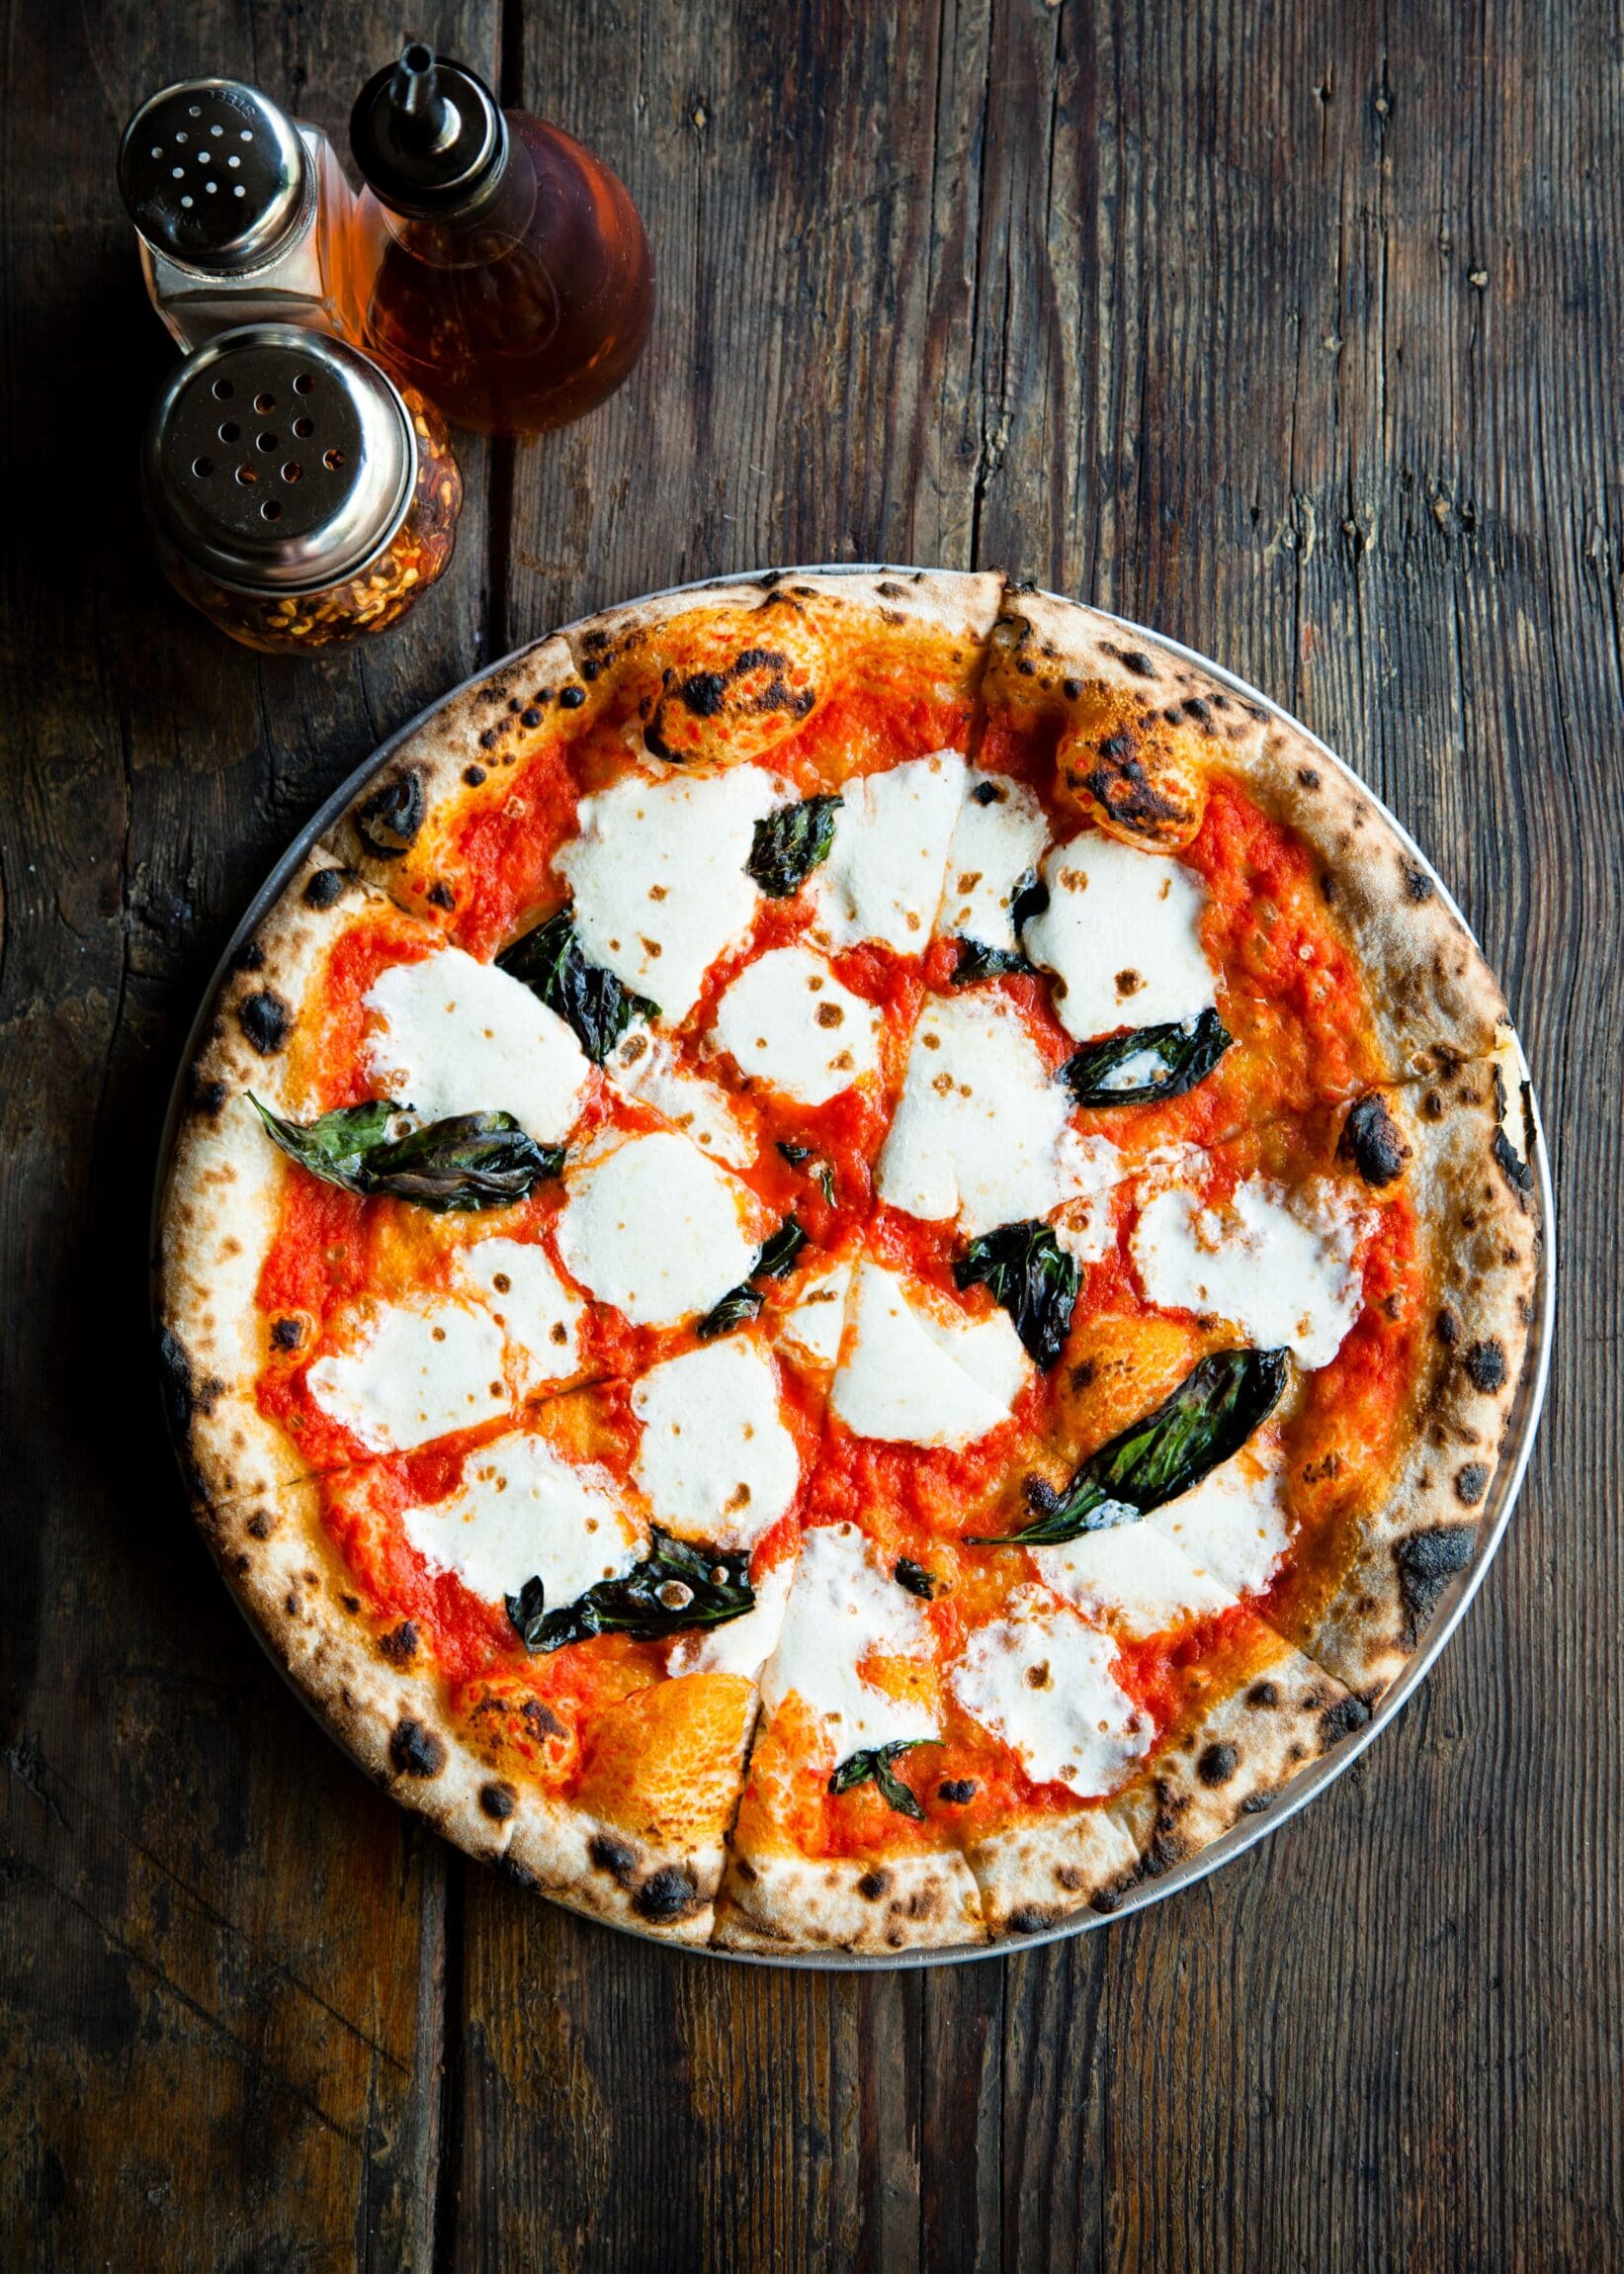 The best restaurants in Williamsburg | a pizza at Roberta's